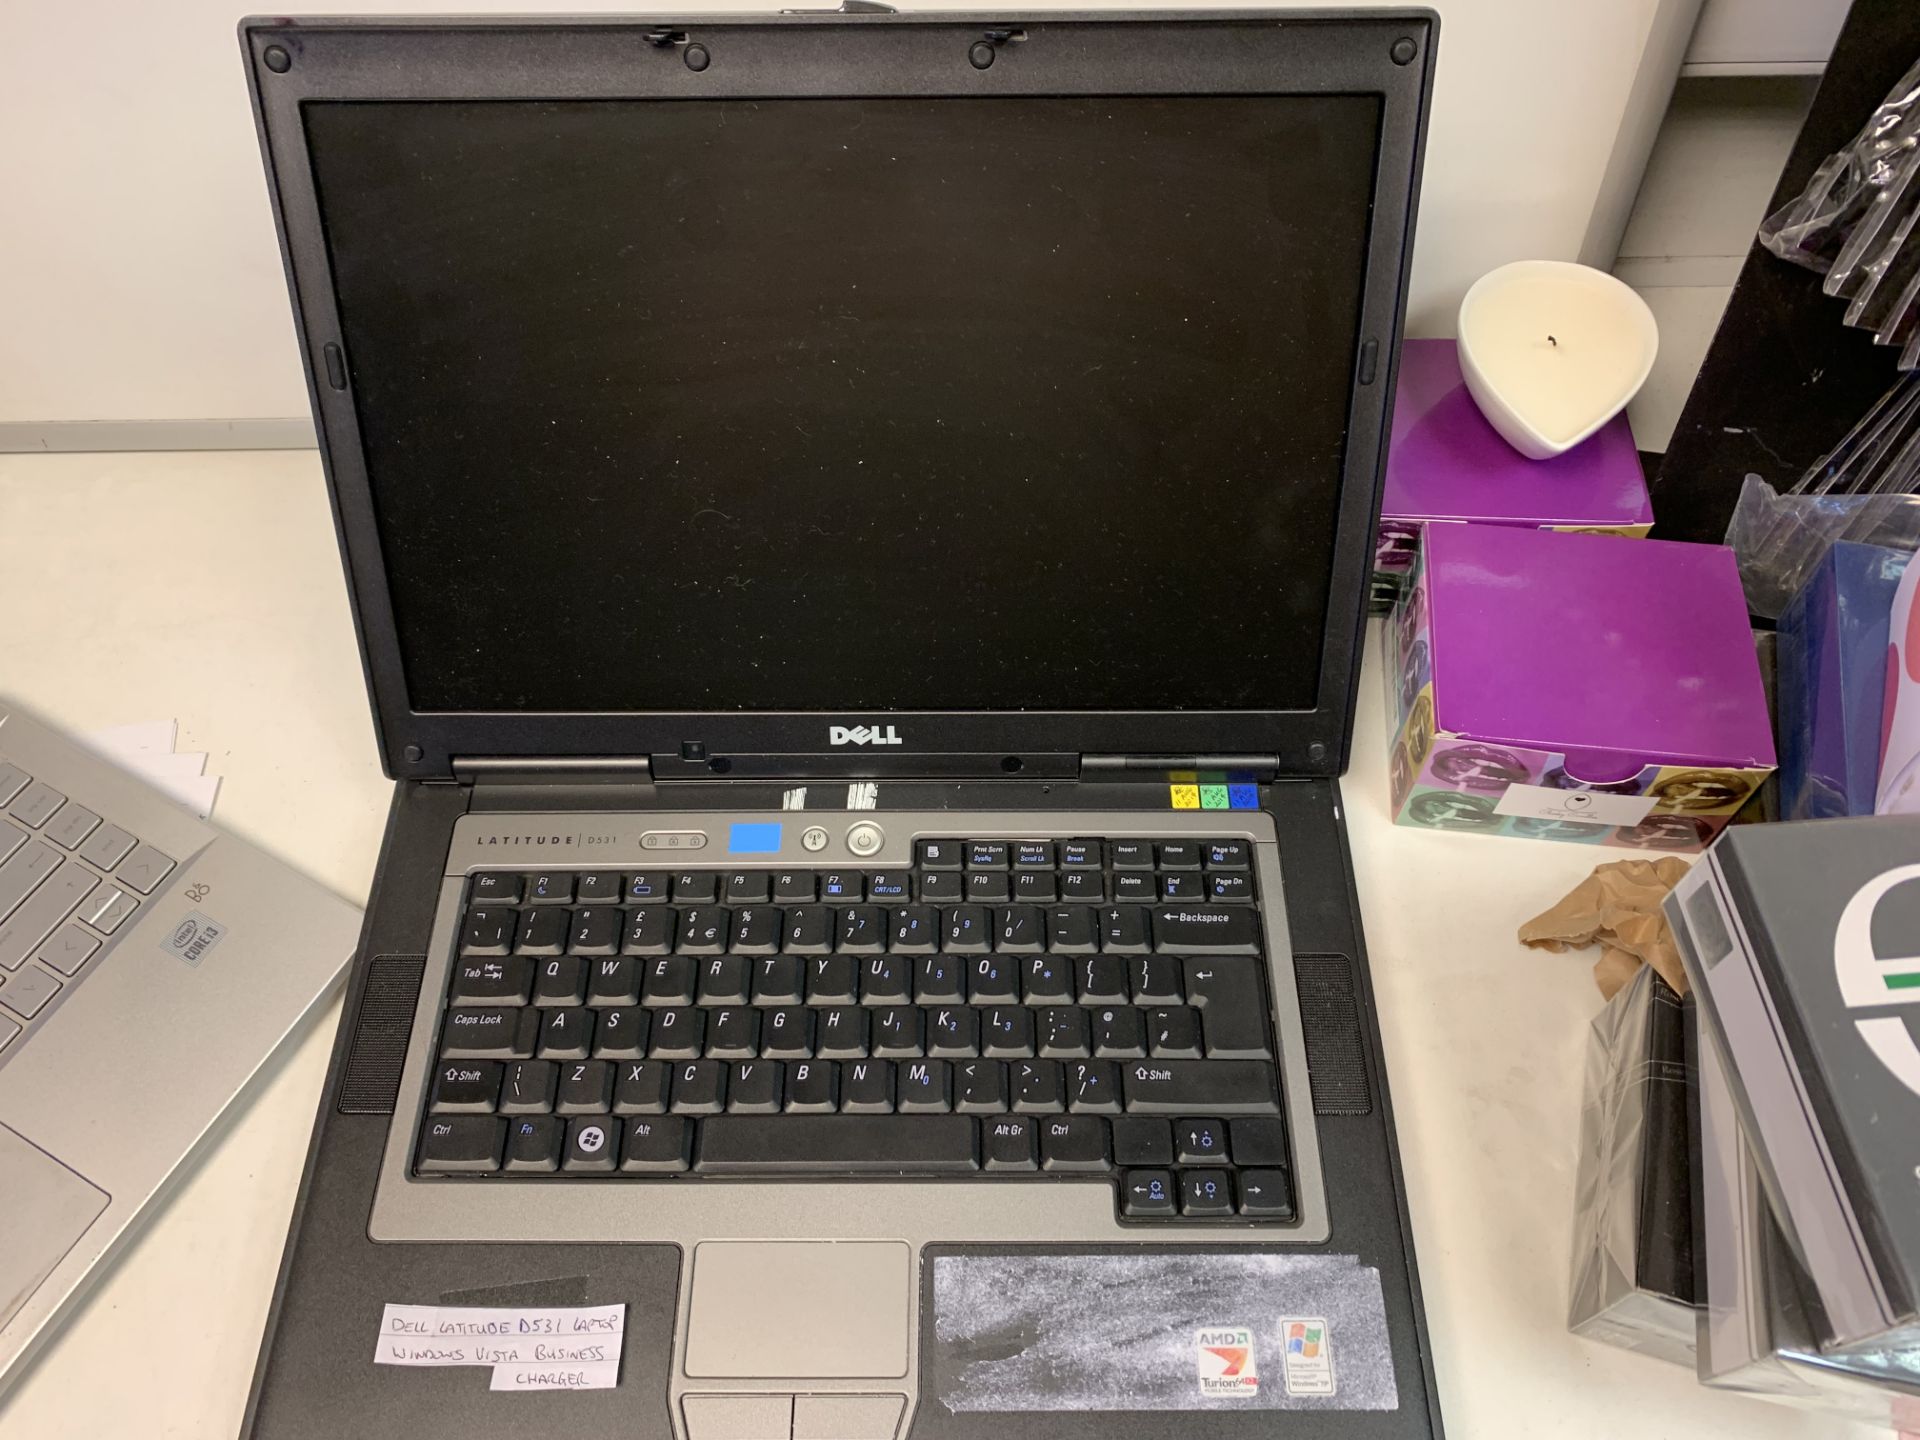 DELL LATITUDE D531 LAPTOP, WINDOWS VISTA BUSINESS WITH CHARGER